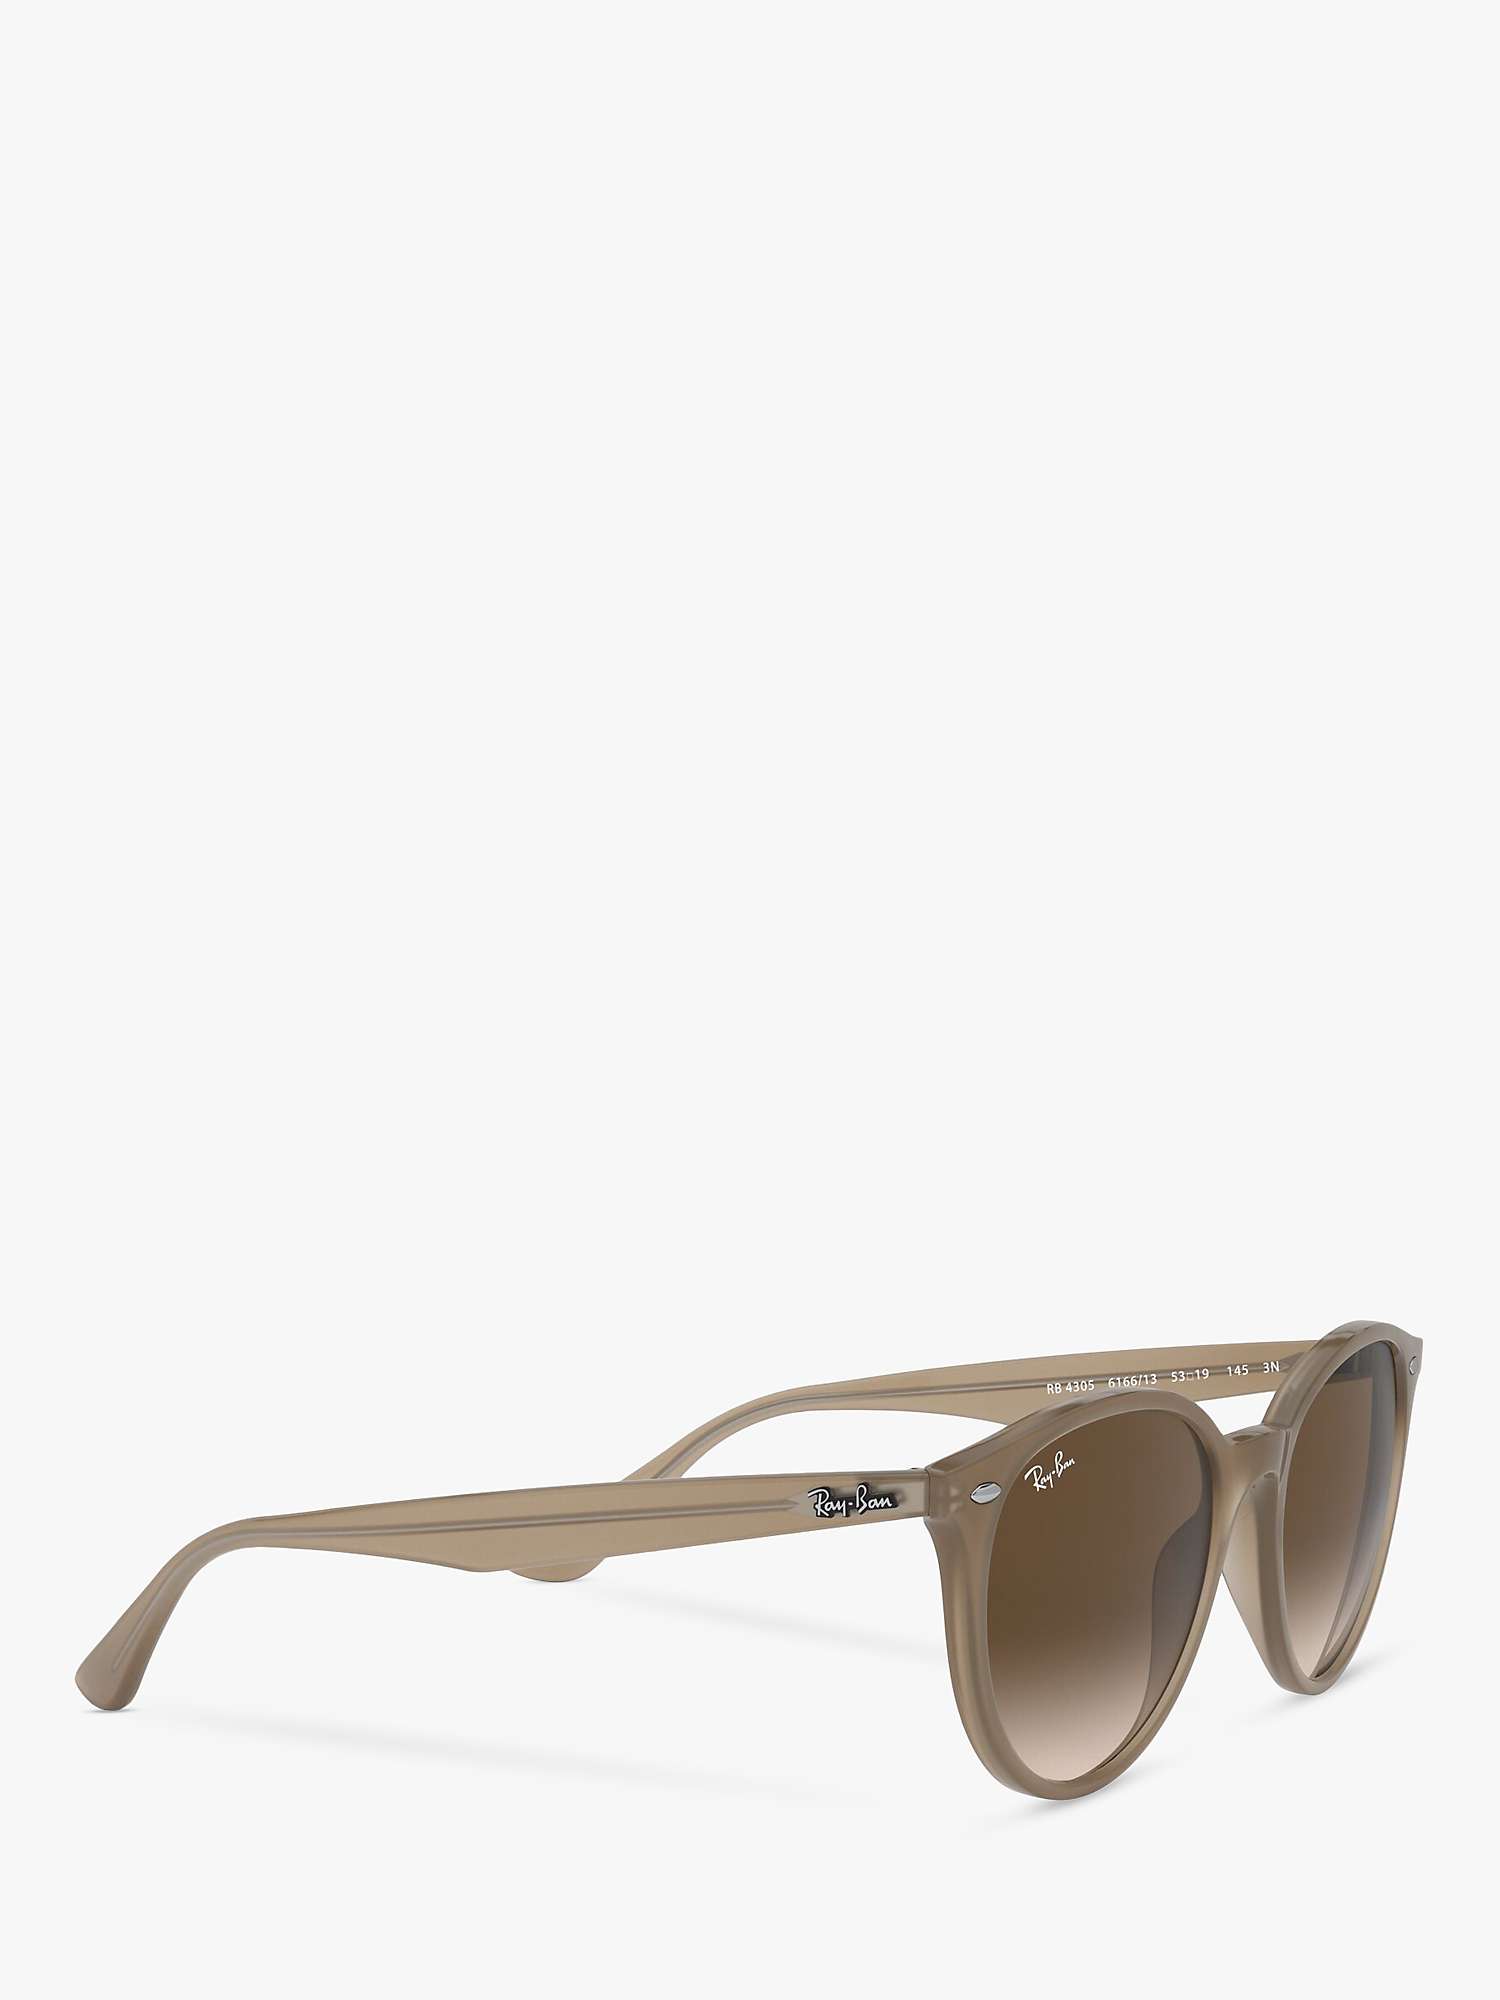 Buy Ray-Ban RB4305 Unisex Oval Sunglasses, Opal Beige/Brown Gradient Online at johnlewis.com